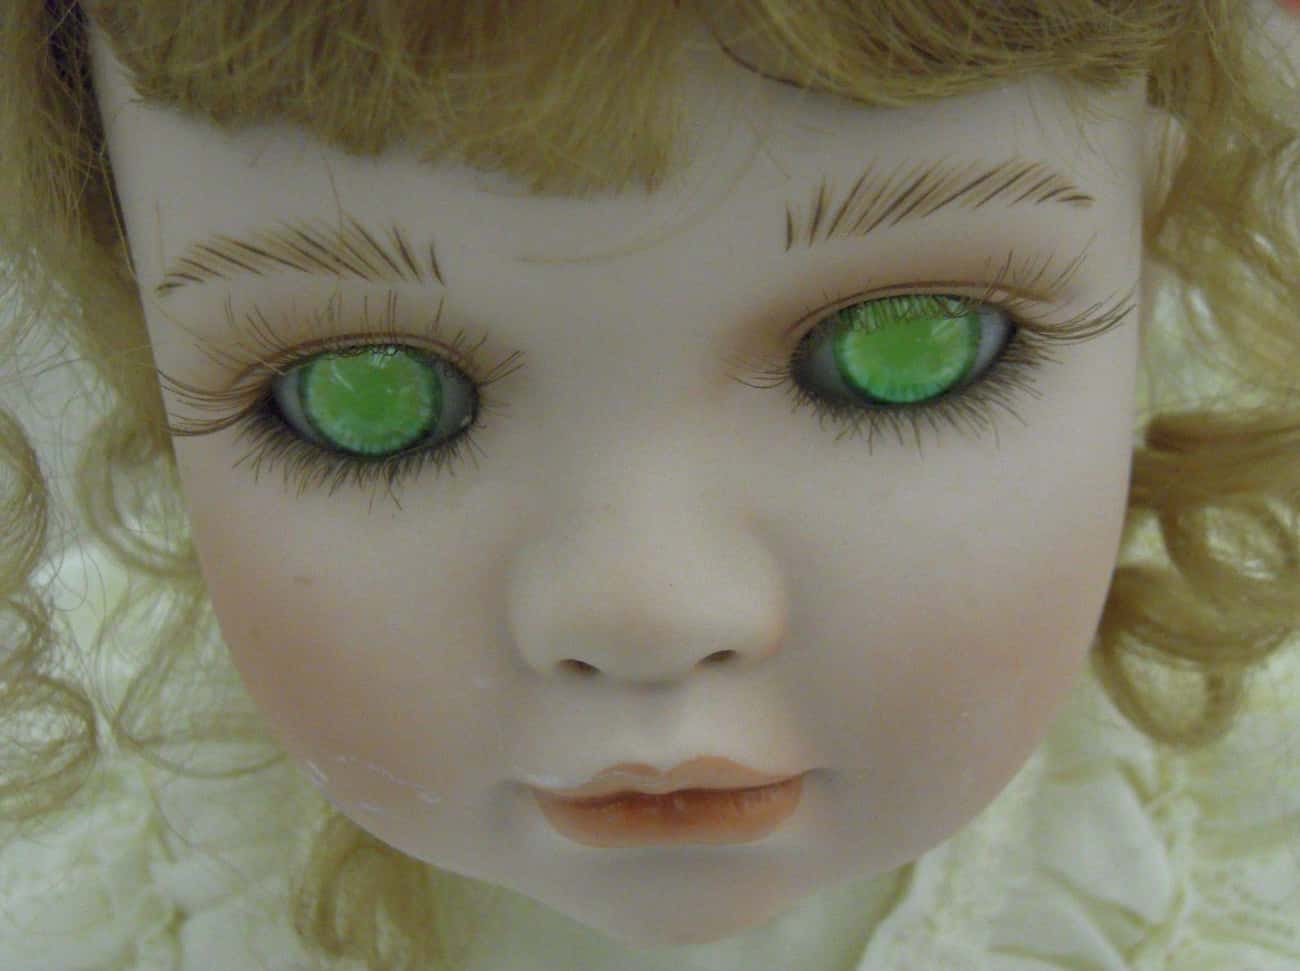 Porcelain Doll, Vacant Green Eyes, Haunted, Possessed, or Cursed